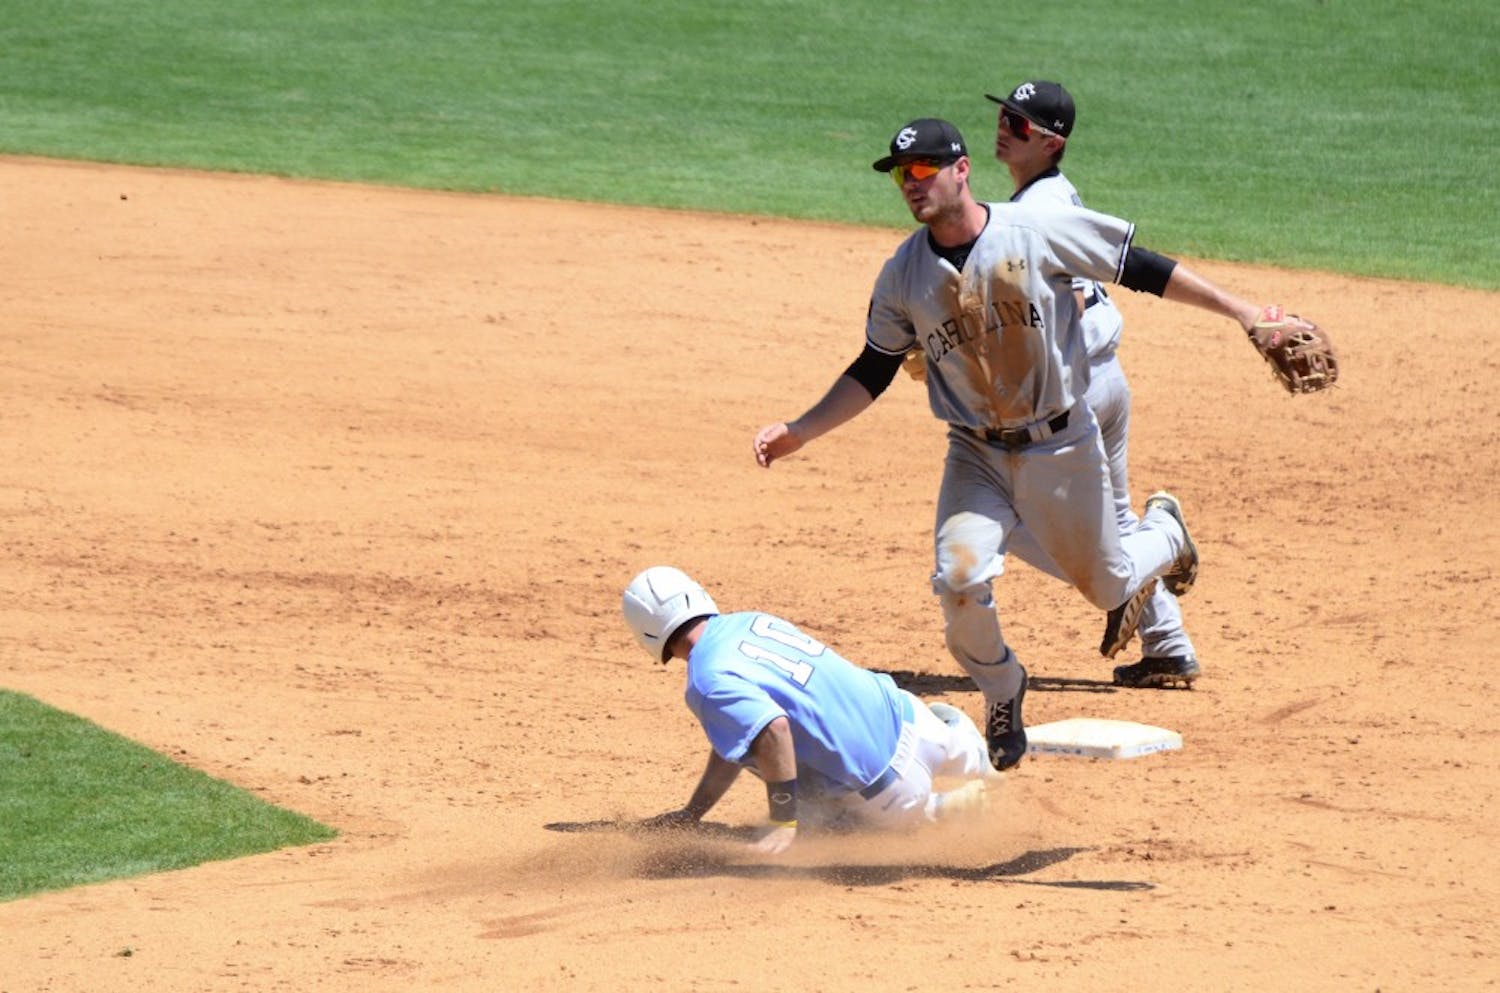 Joey Pankake leaps over a UNC player after throwing the ball to first for a double play.